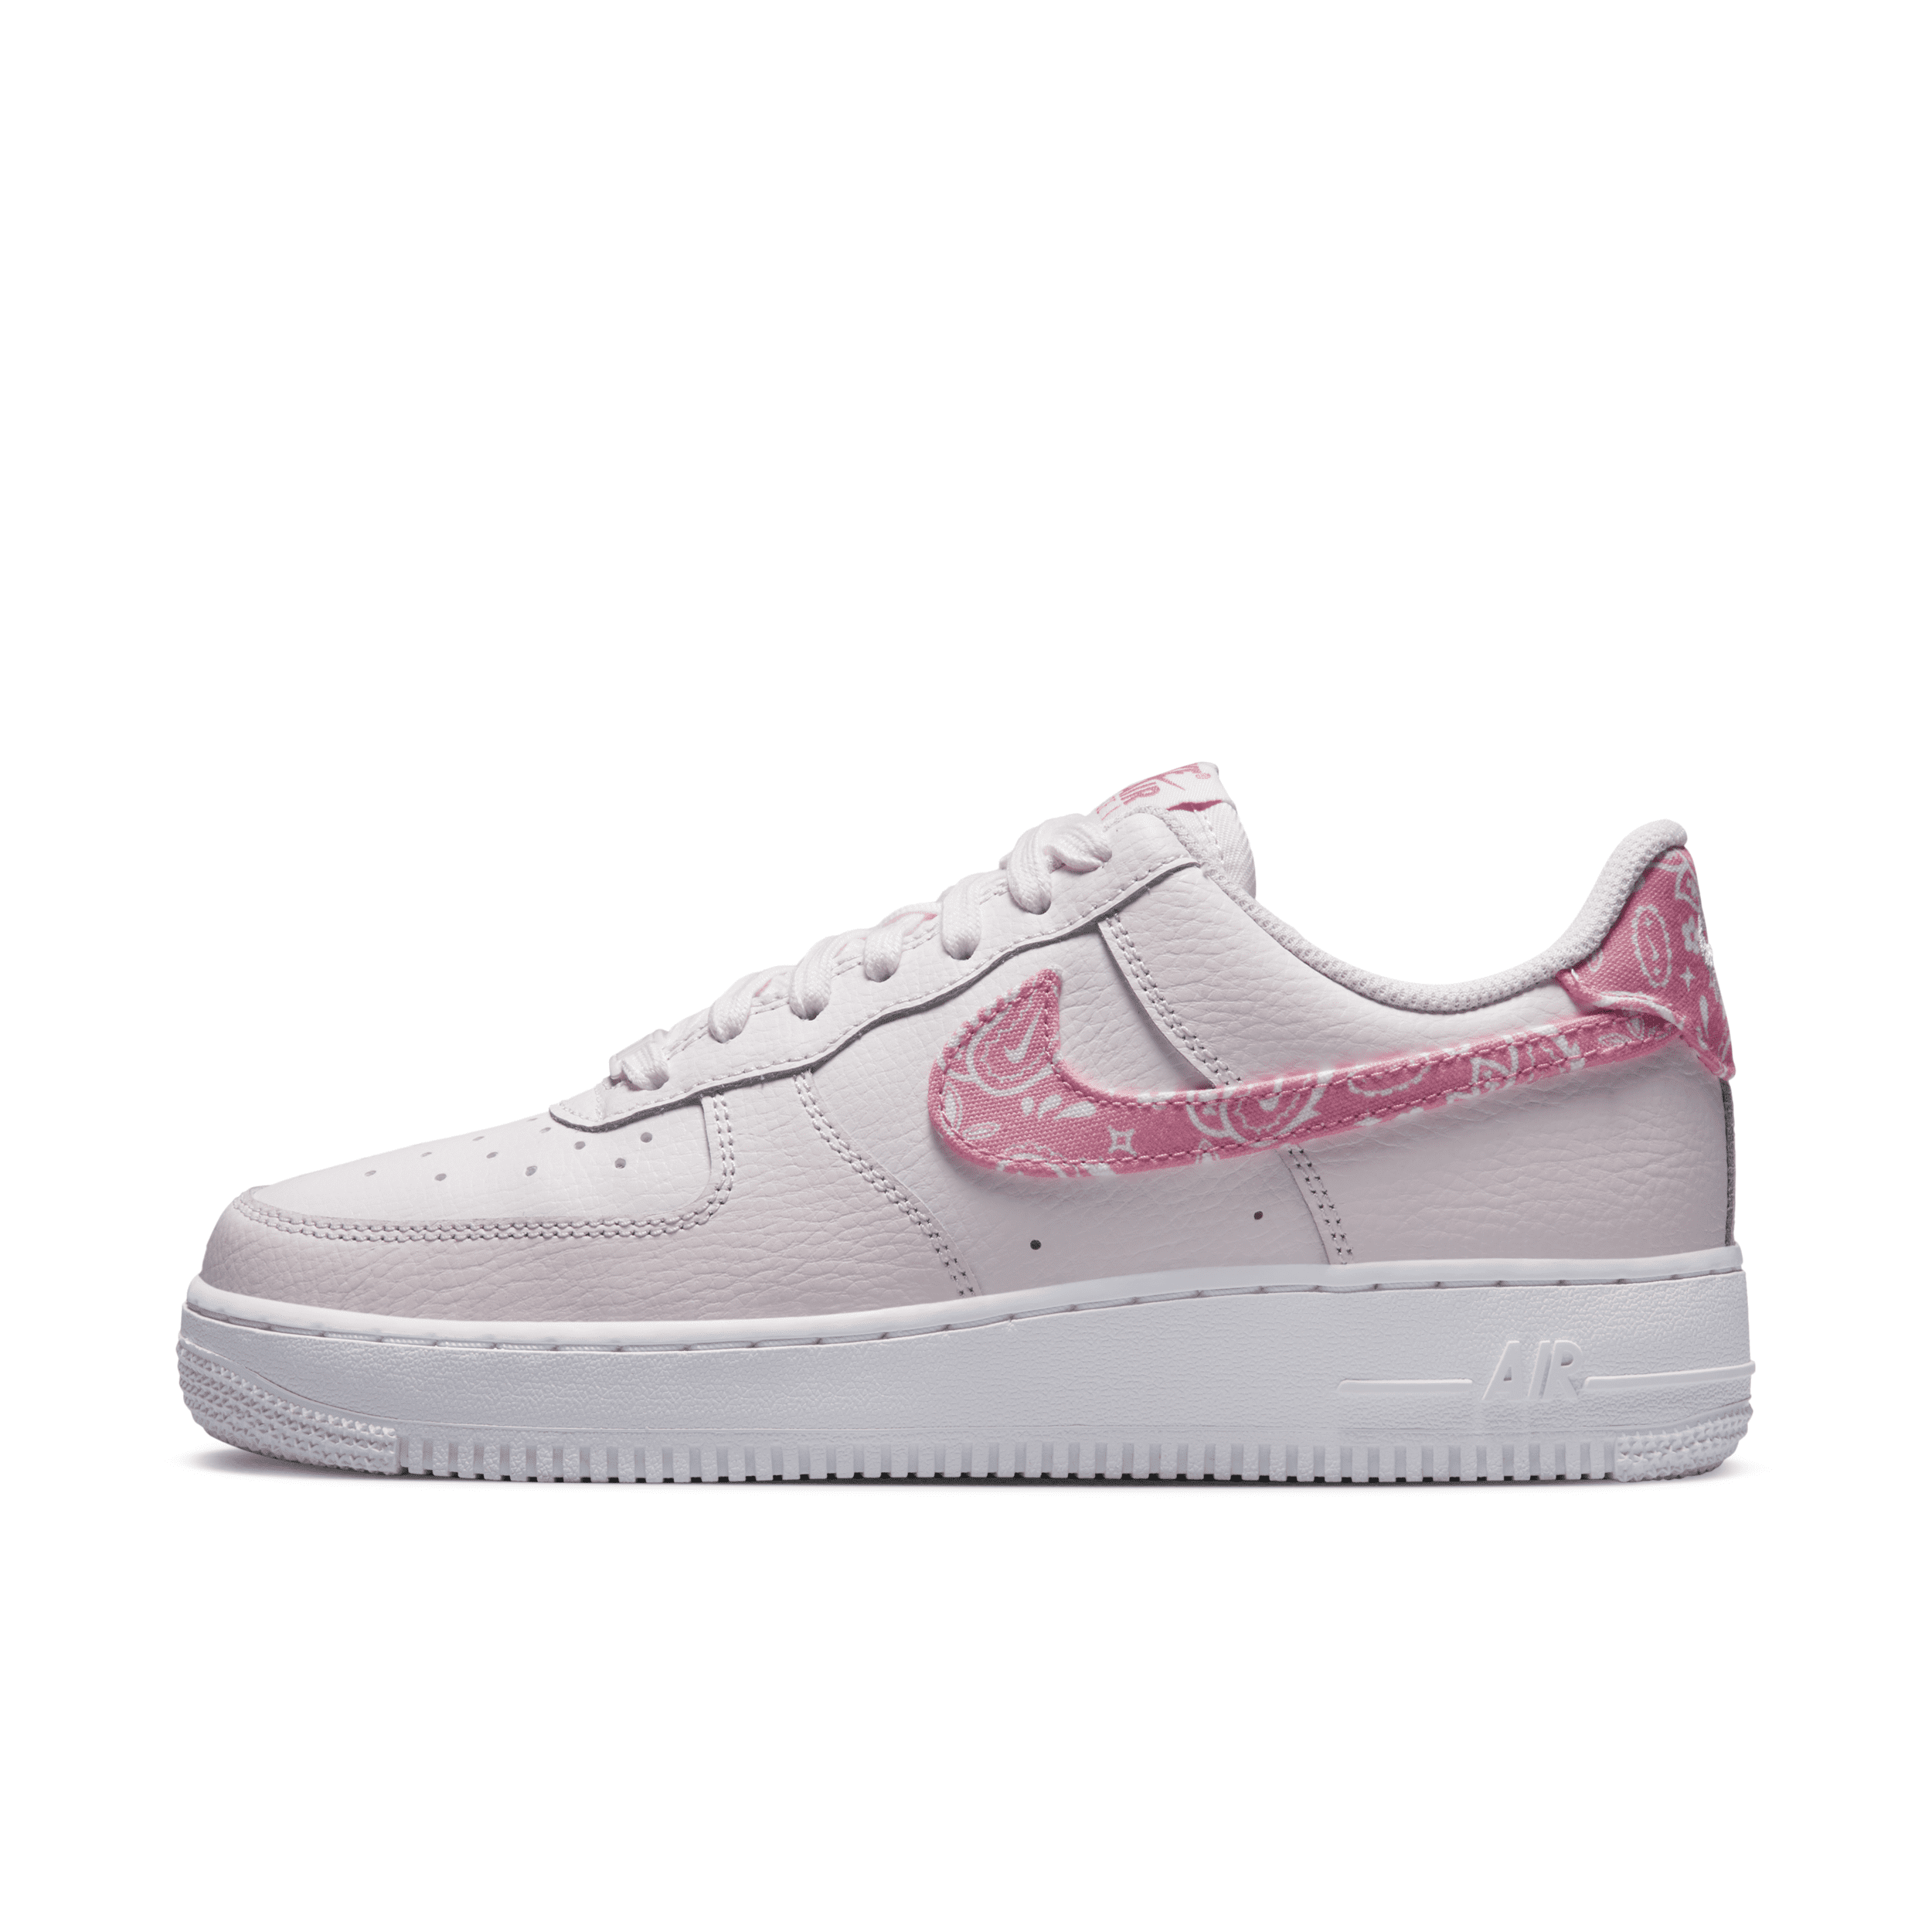 Nike Women's Air Force 1 '07 Shoes In Pink